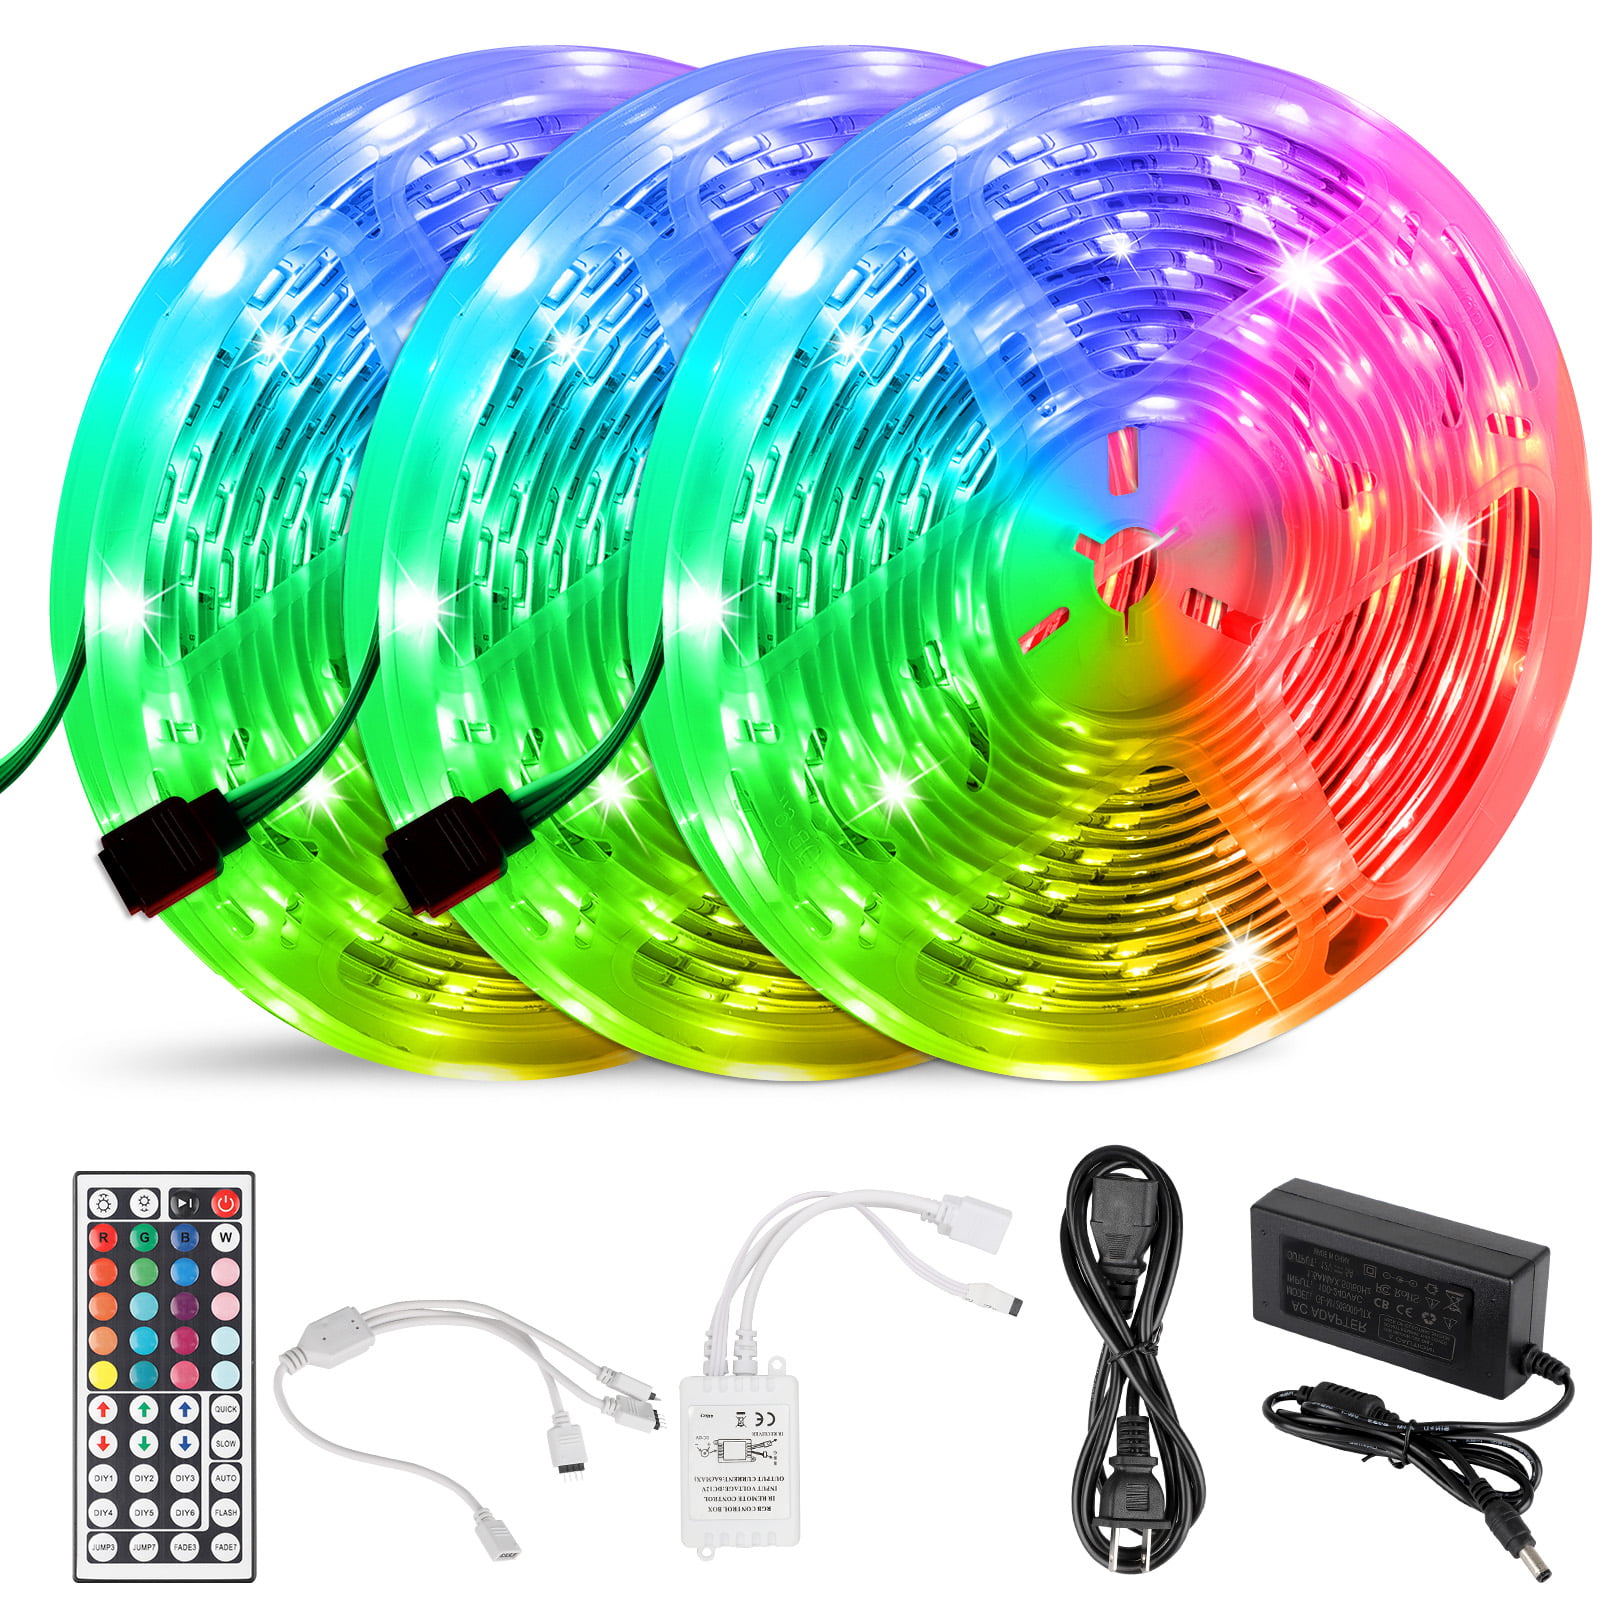 LED Lights Strap Changing Light Waterproof Party Home Decor Cordless Multi Color 